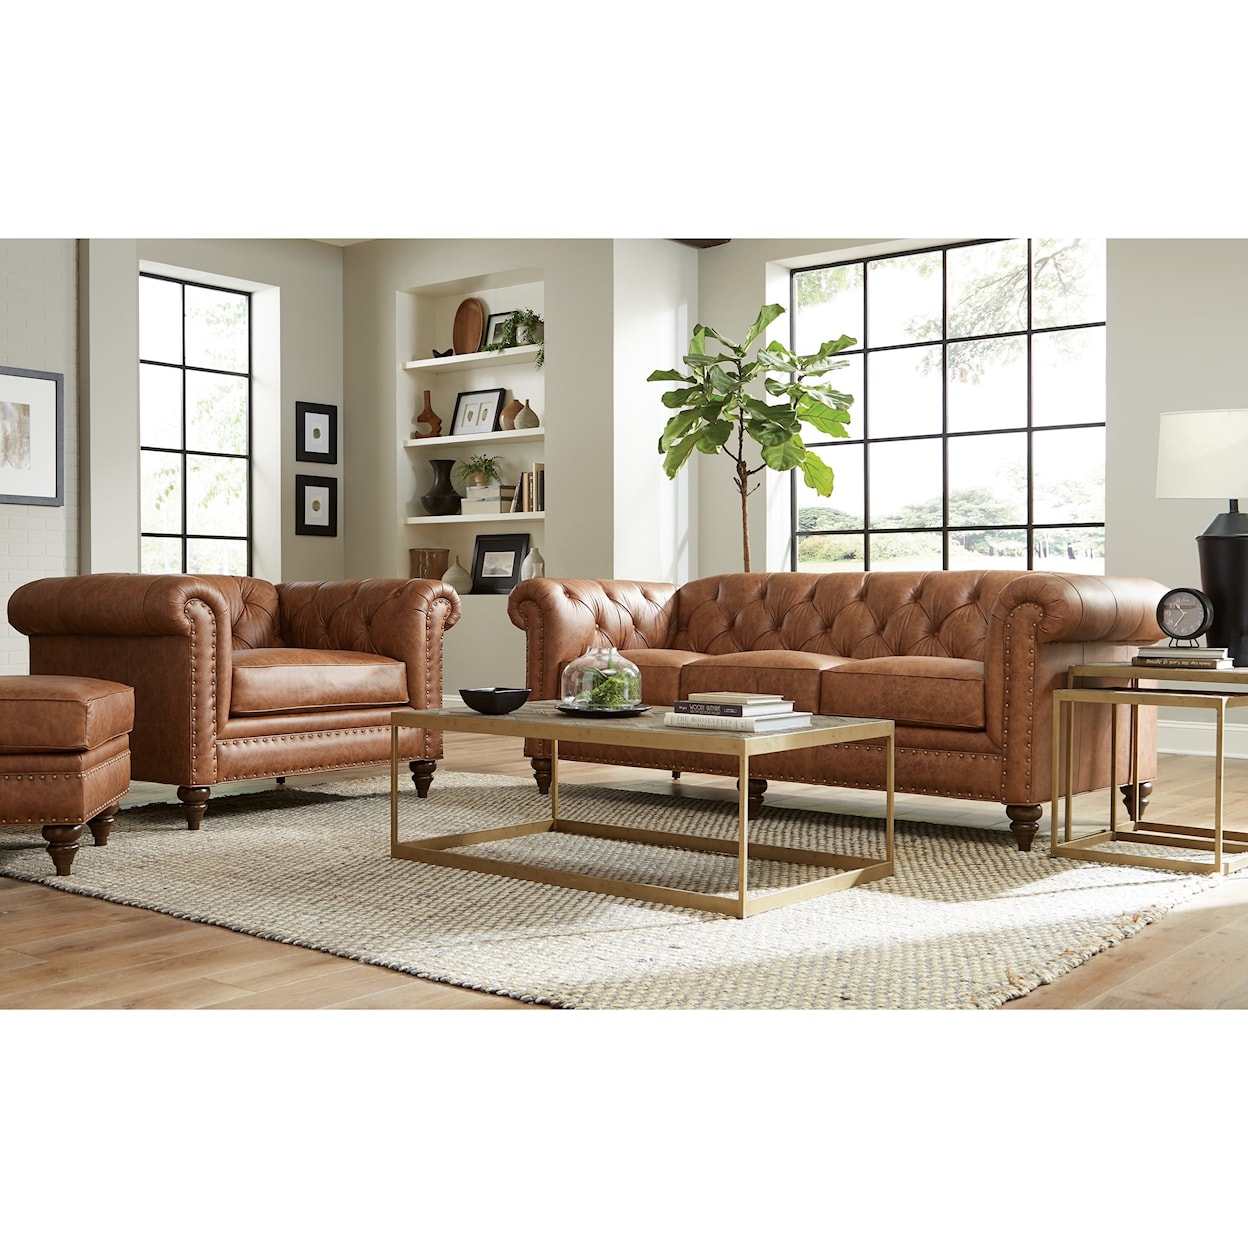 Hickory Craft L743350 Living Room Group